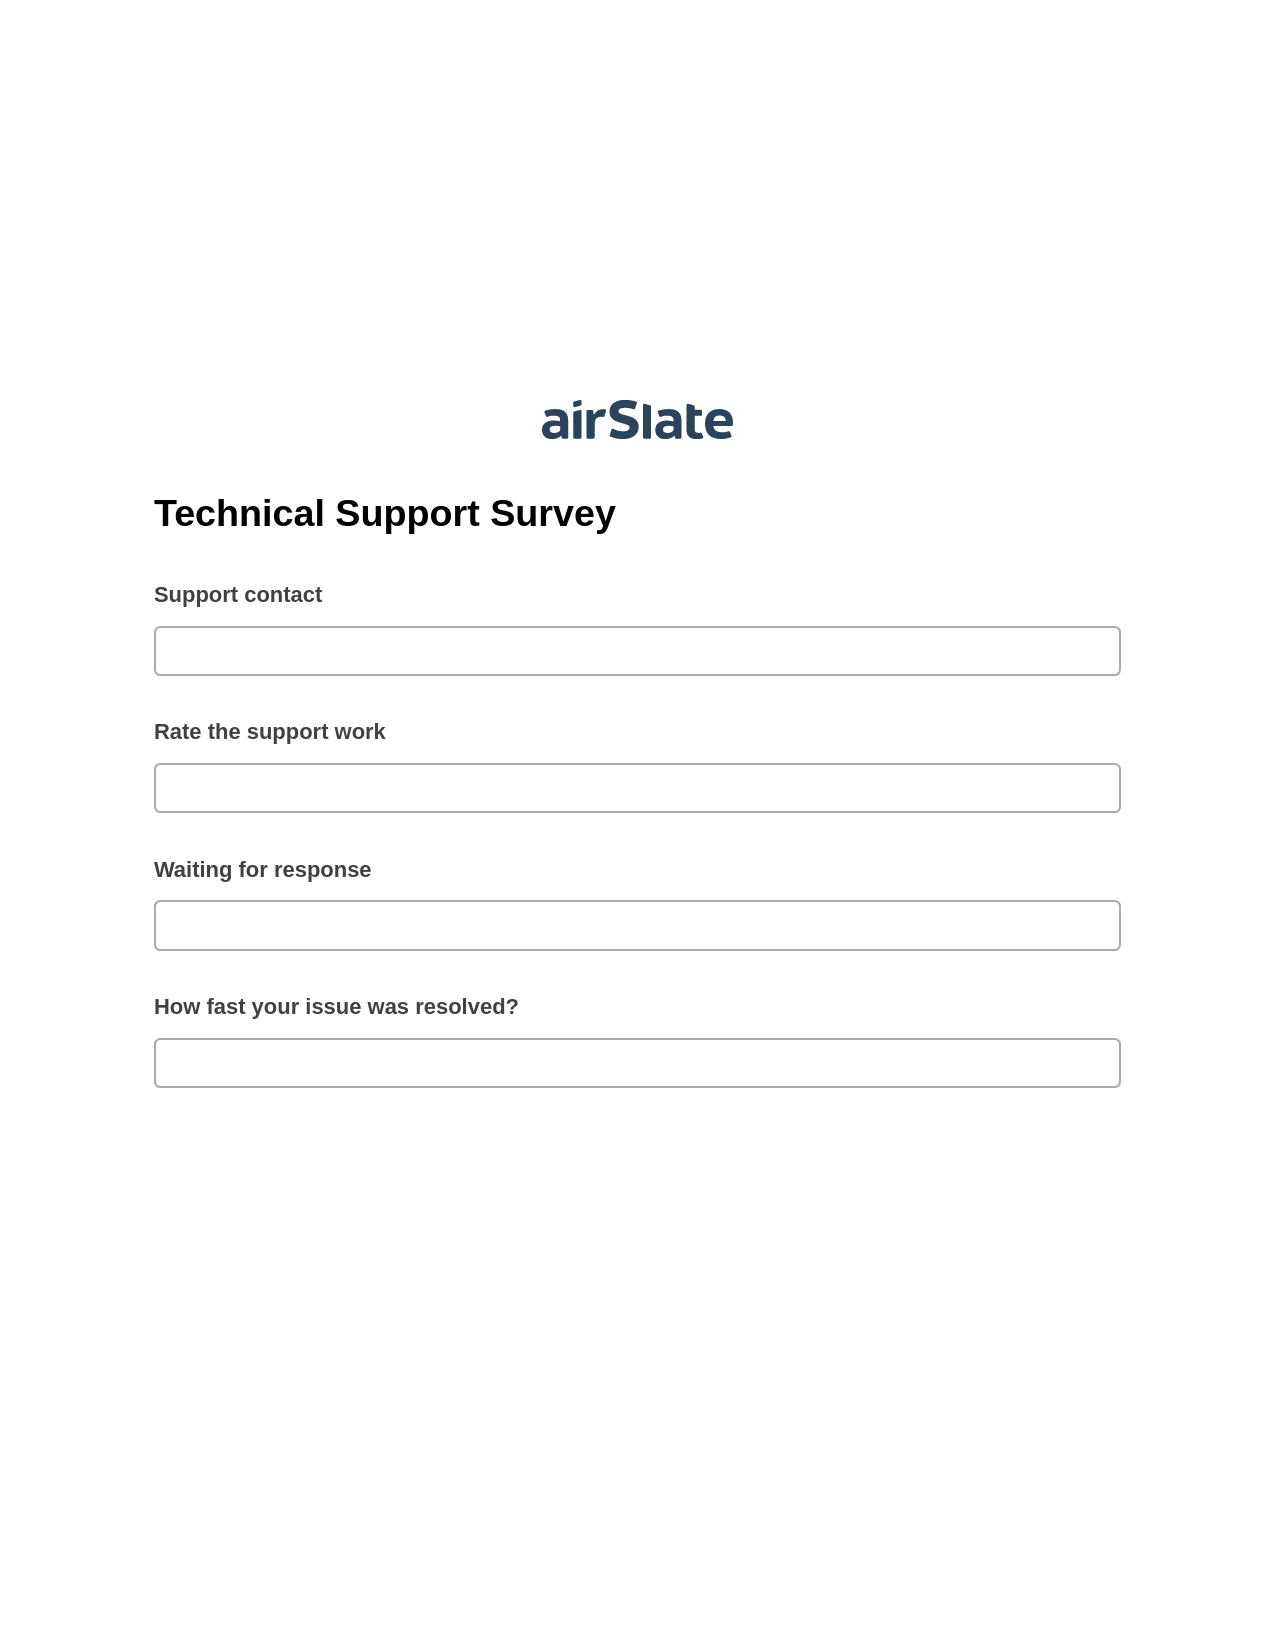 Technical Support Survey Pre-fill from Salesforce Records Bot, Send a Slate with Roles Bot, Webhook Postfinish Bot